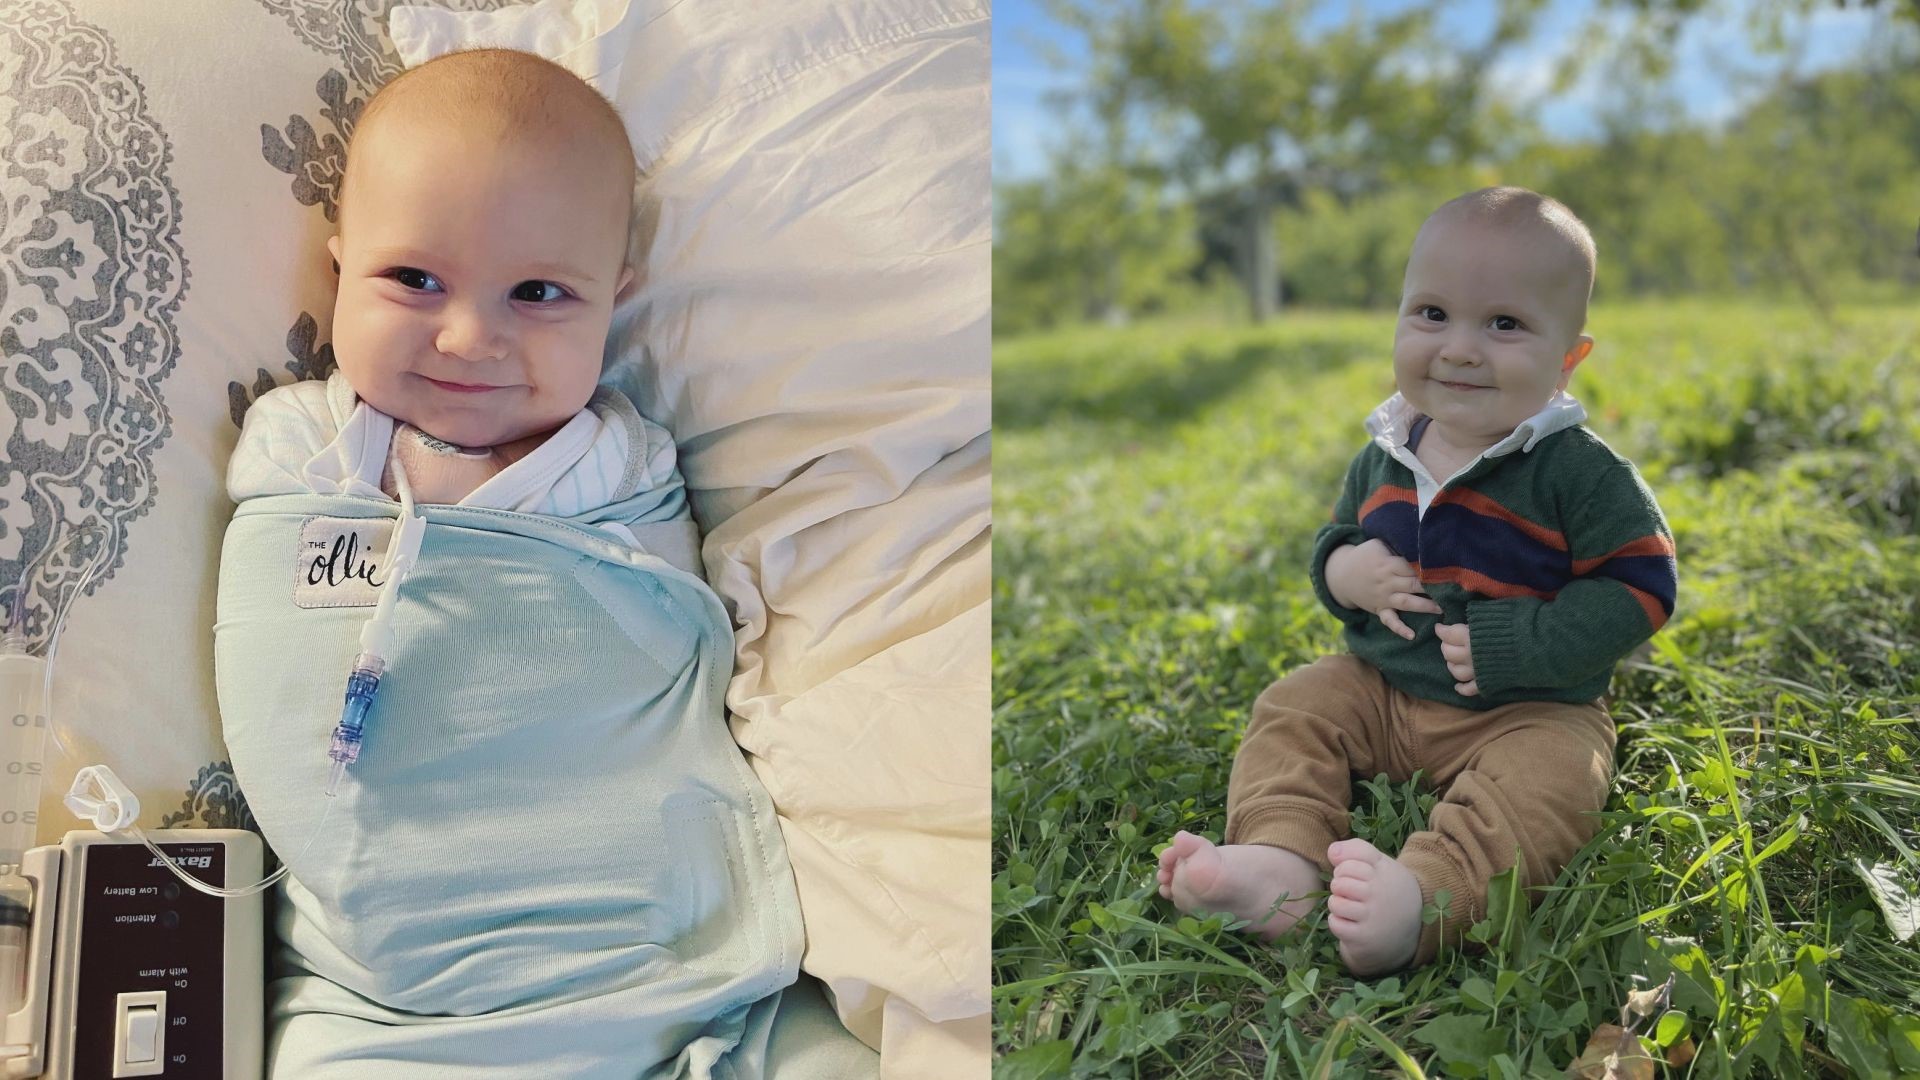 James was born without the protein that helps his blood clot, so any potential injury could result in uncontrolled bleeding. Donations provide life-saving treatment.